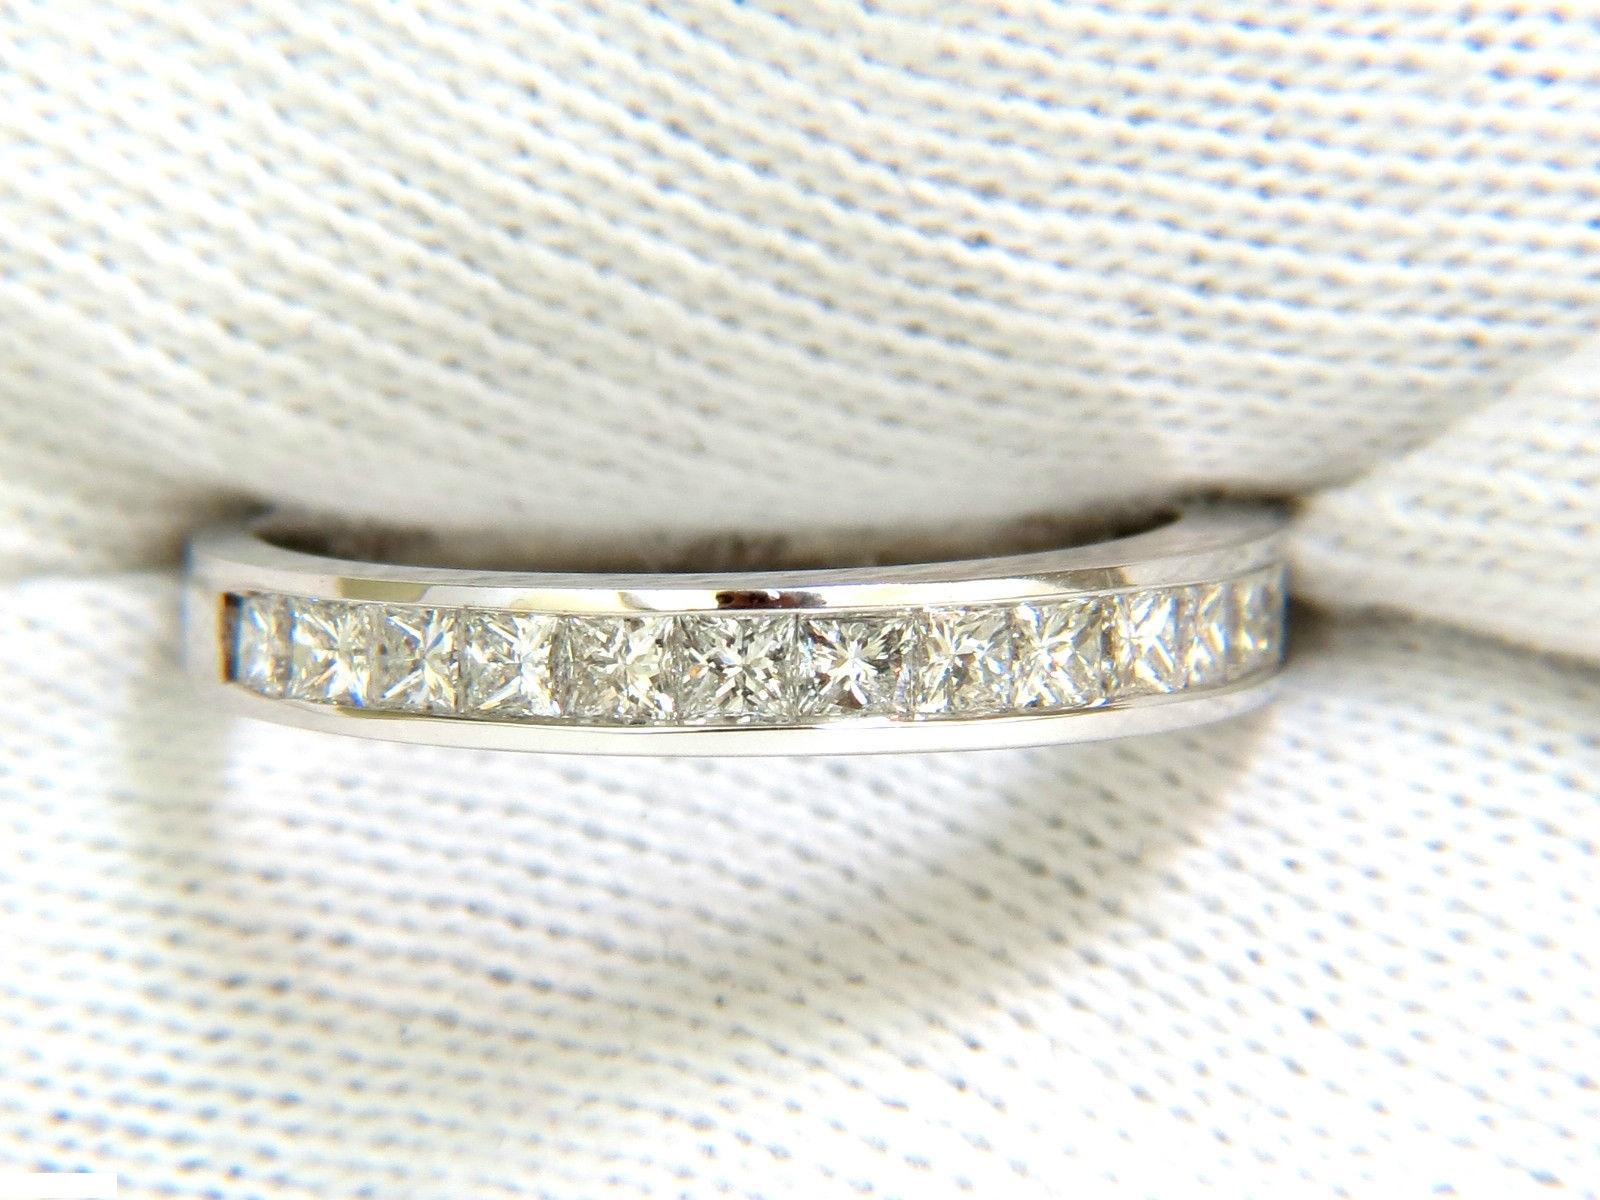 Modern prime

.70ct. Princess cut diamonds band

H-color, Vs-2 clarity

14kt. white gold.

2.7 grams

3.20mm wide

 size: 6.5

can resize, please inquire

$3000 appraisal will accompany